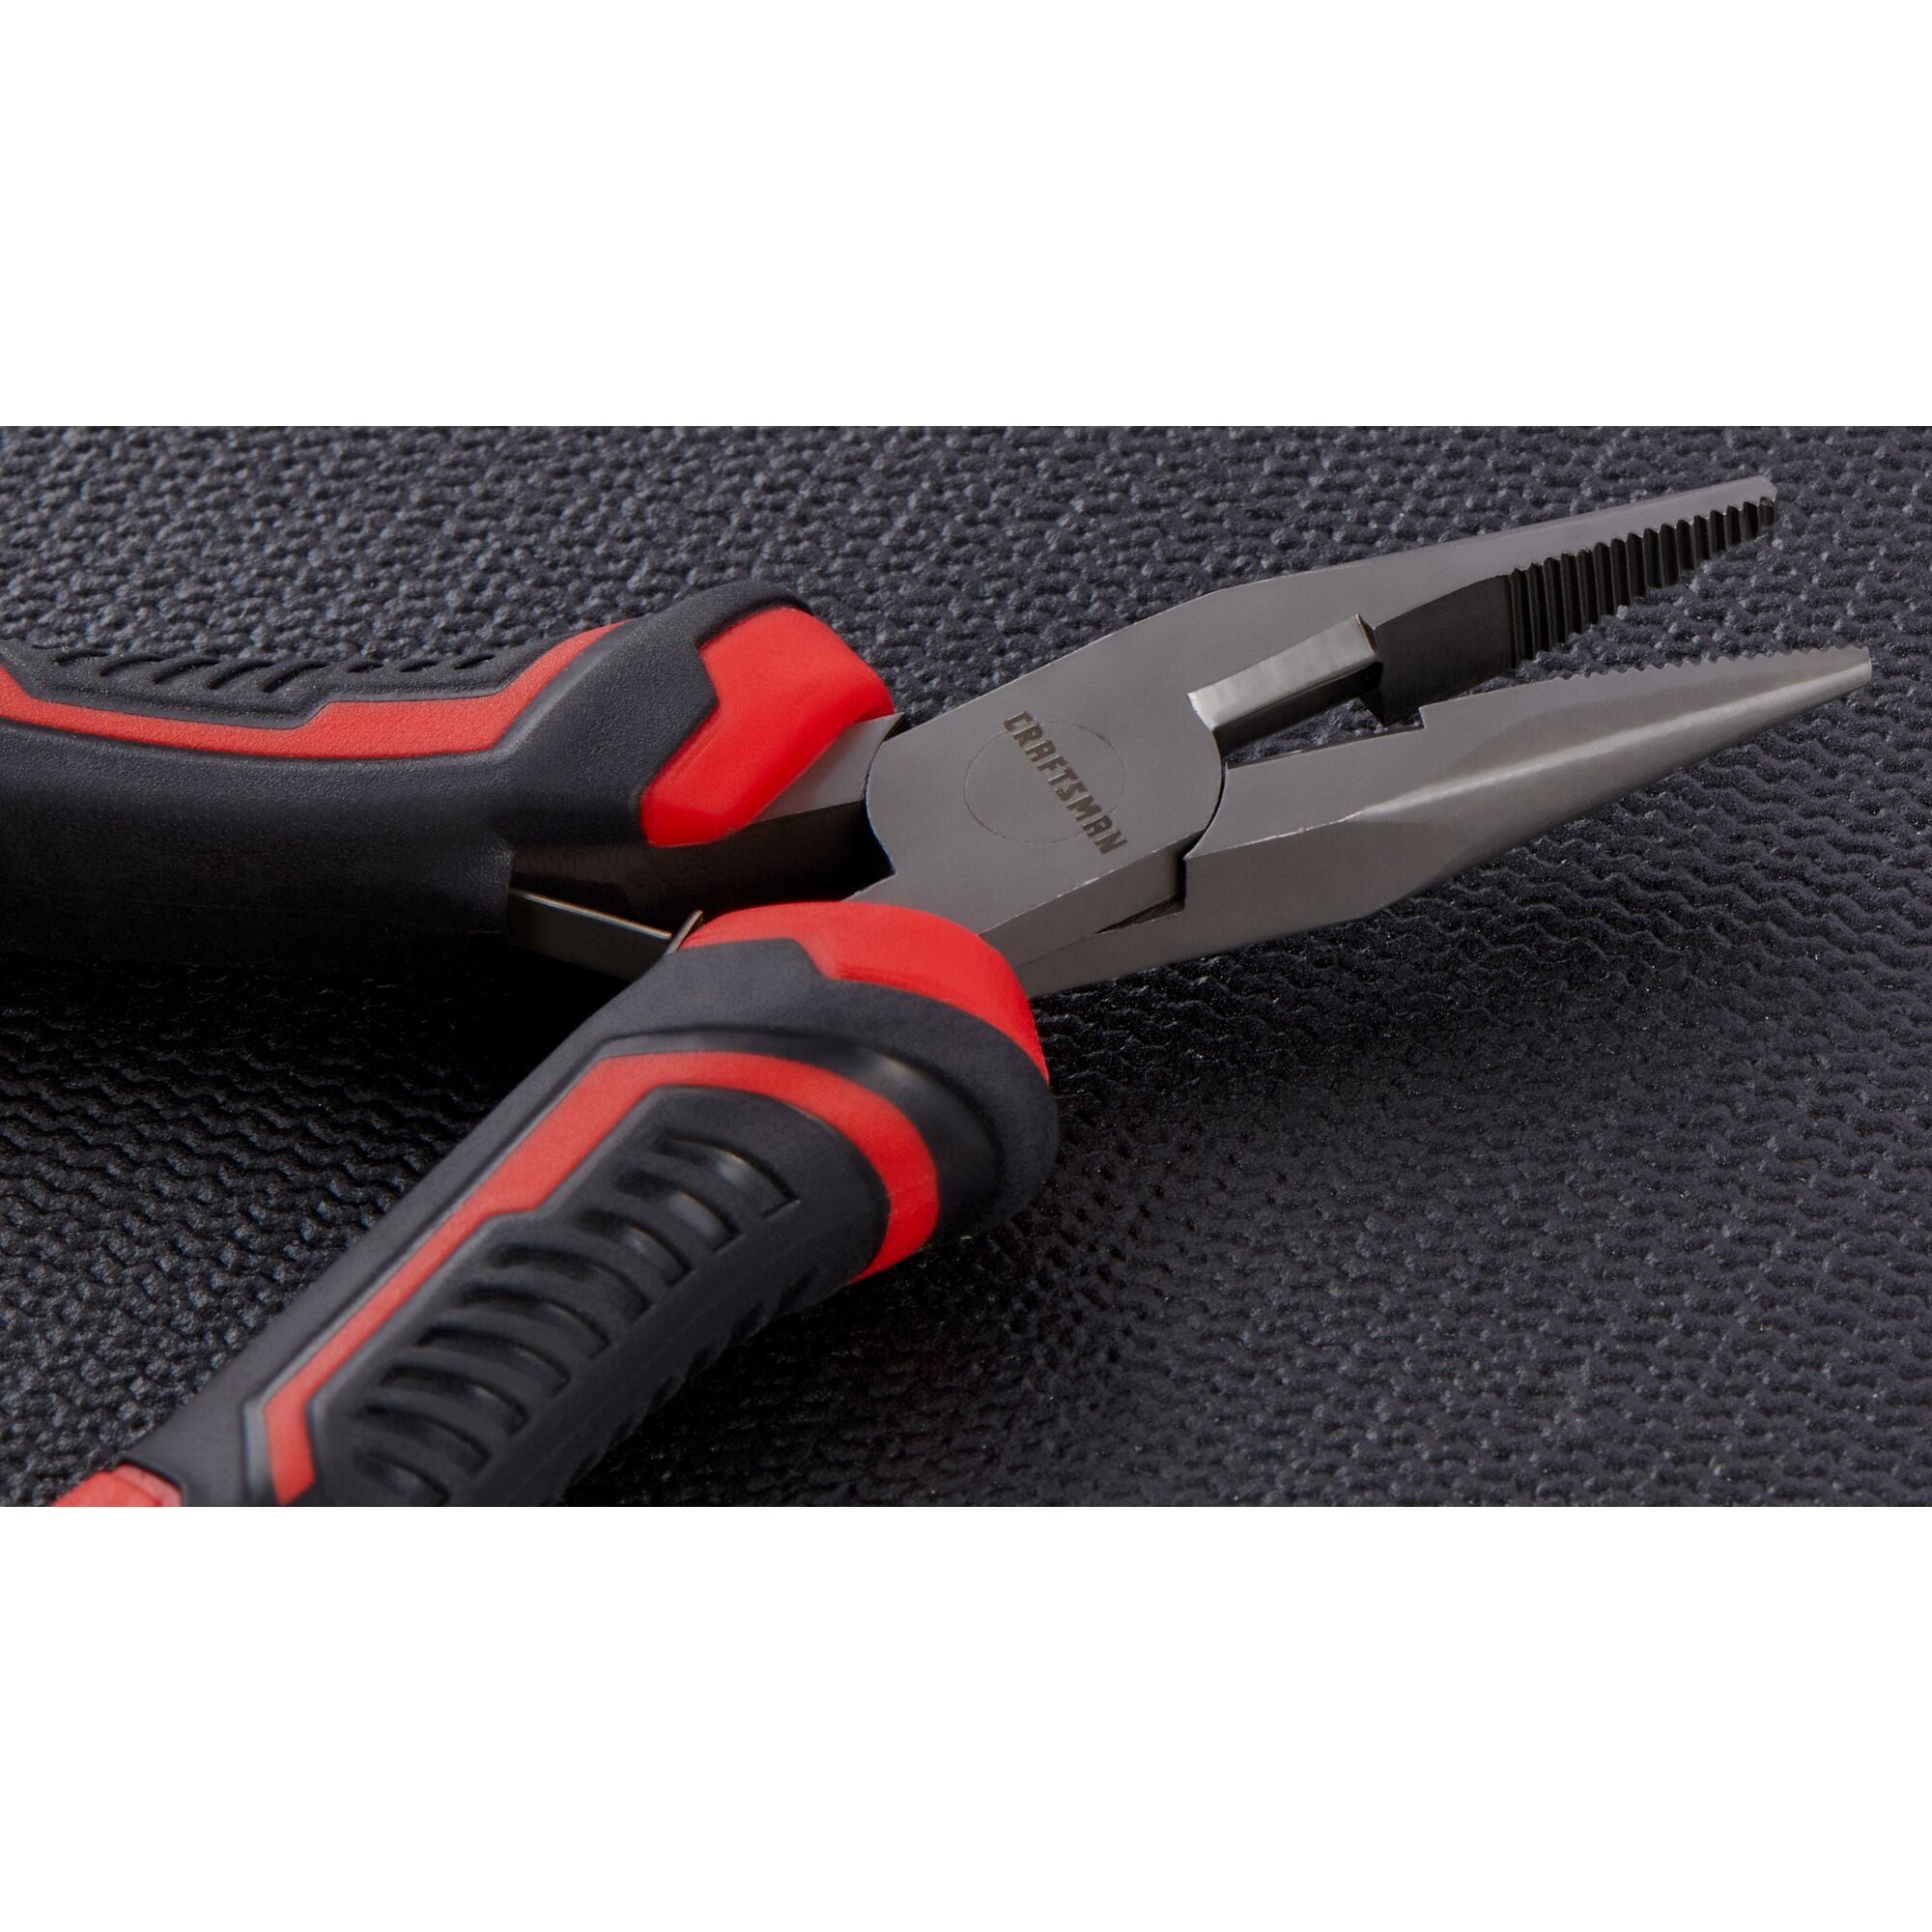 Sears.com: Craftsman 5 Piece Mini-Pliers Set Only $14.99 (Regularly $39.99)  + More